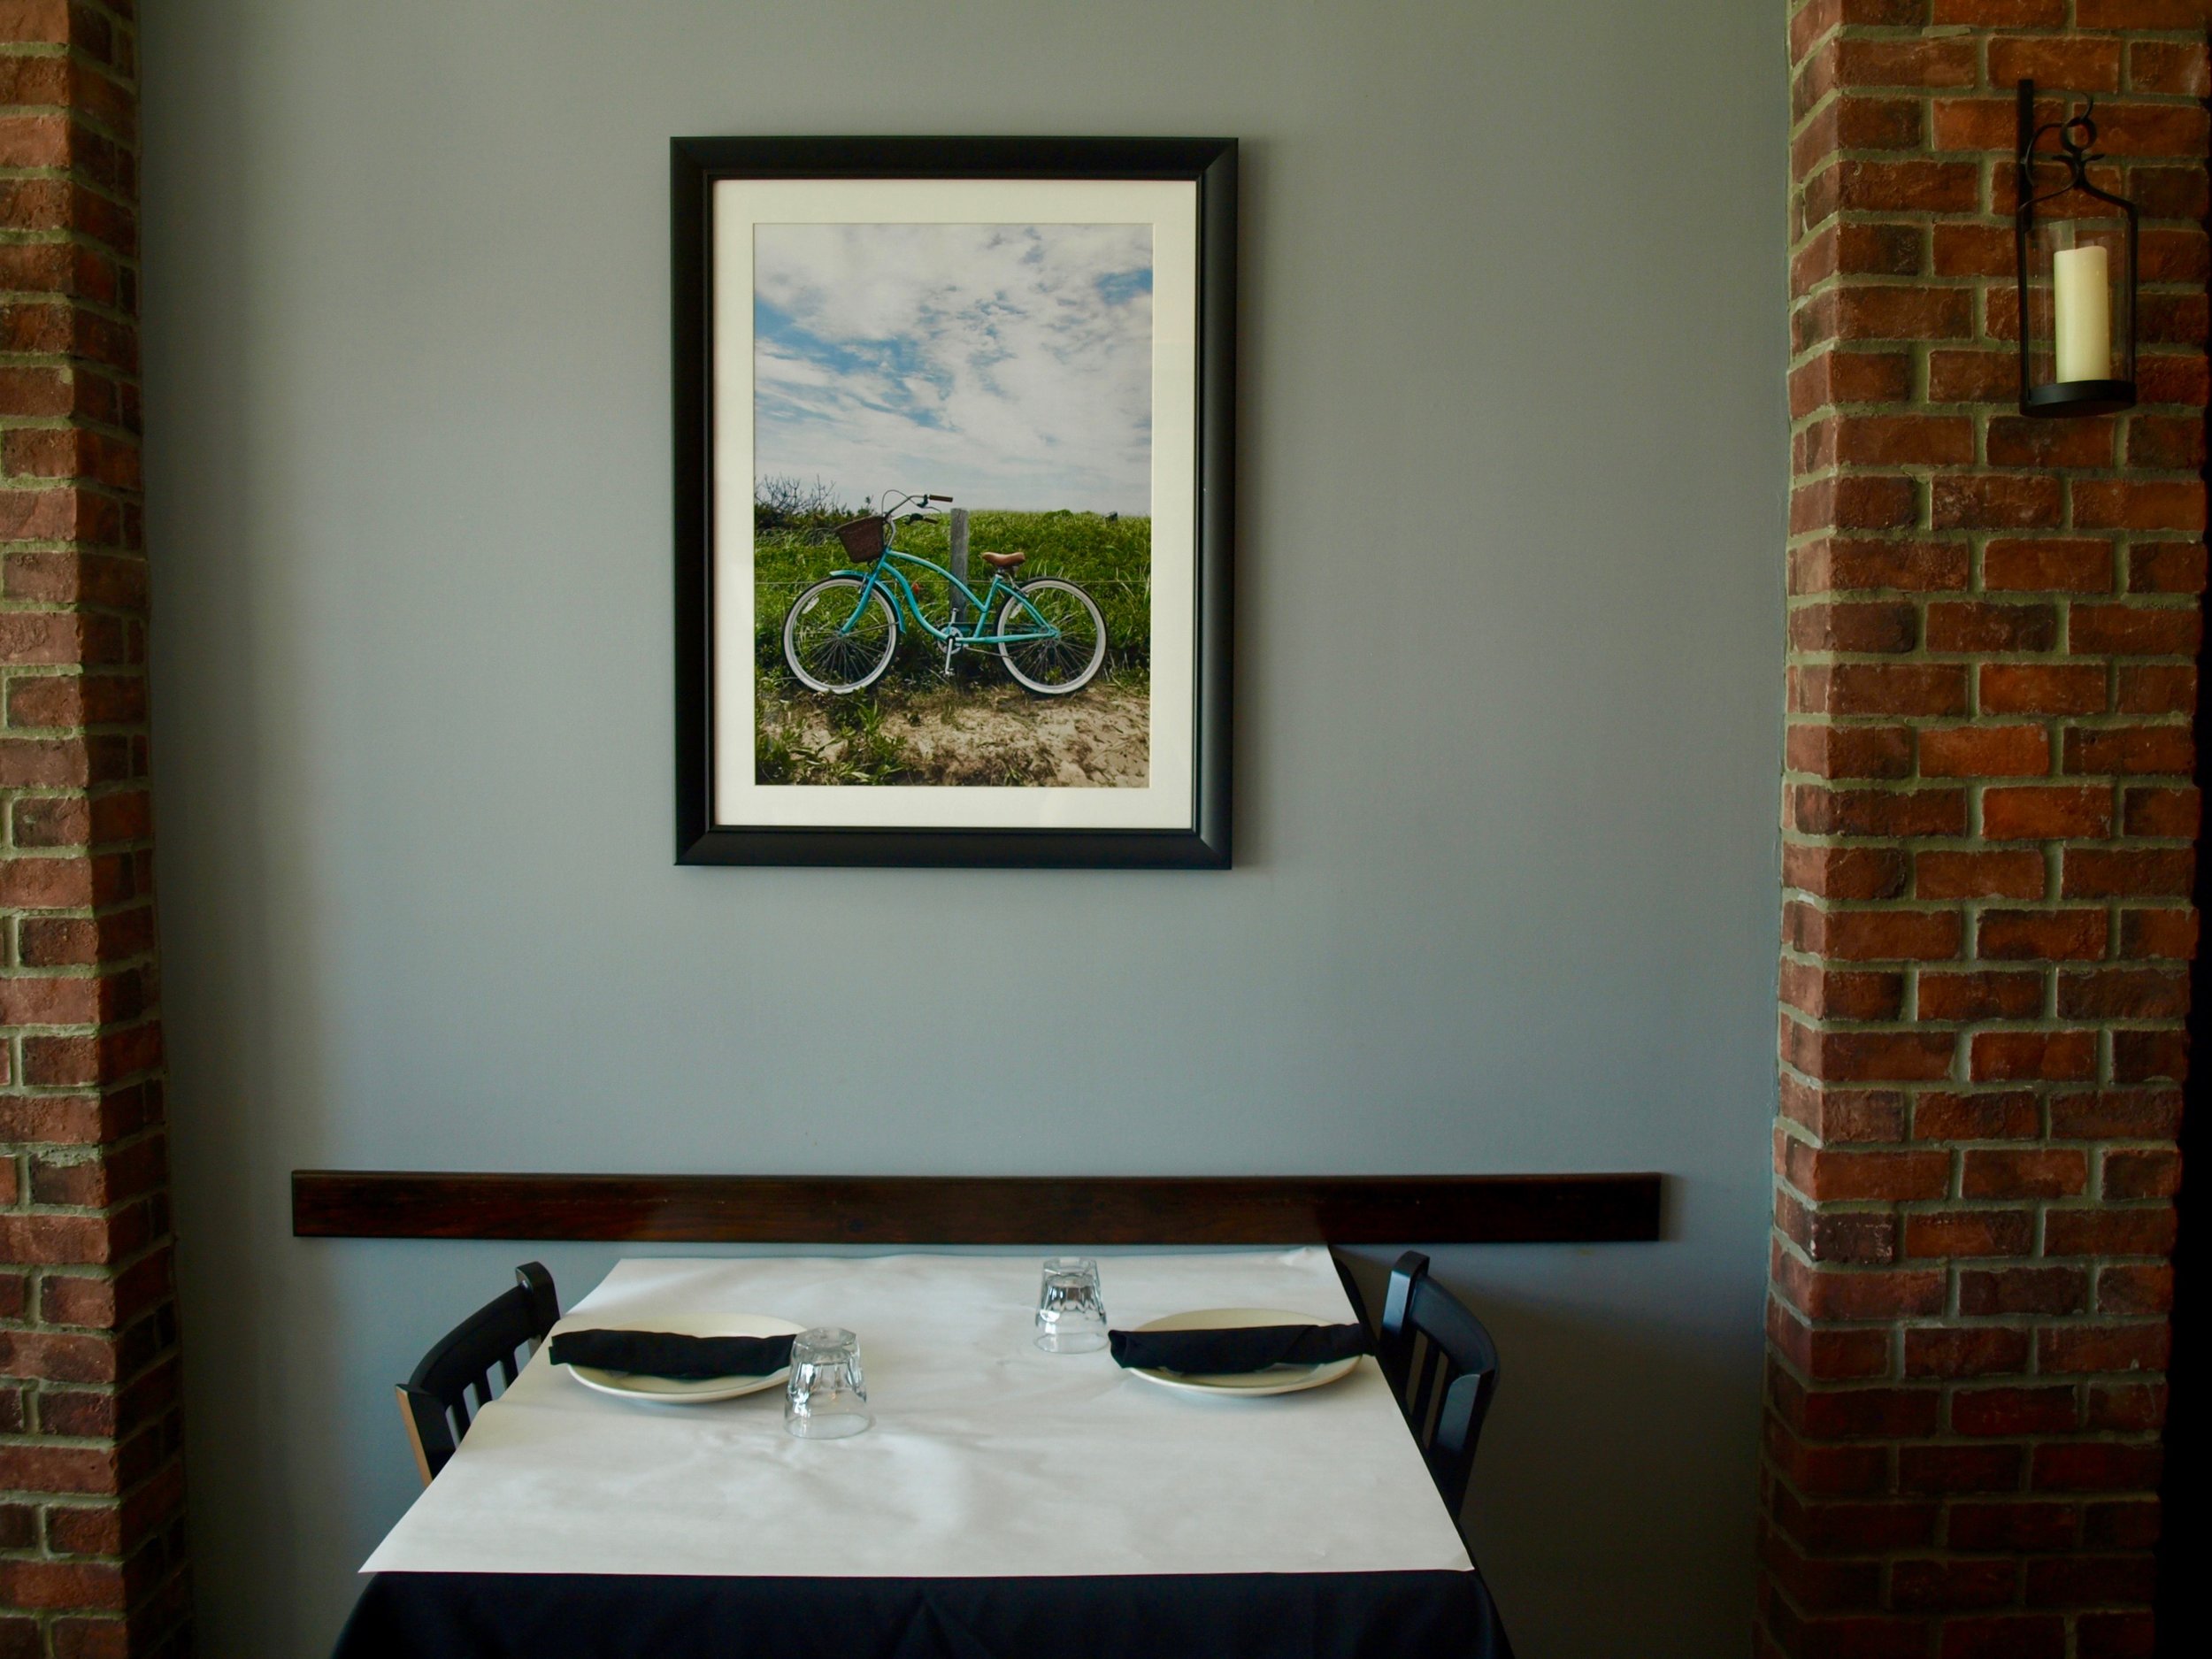   Eatalia’s interior features photographs taken by a member of the Salese family.  